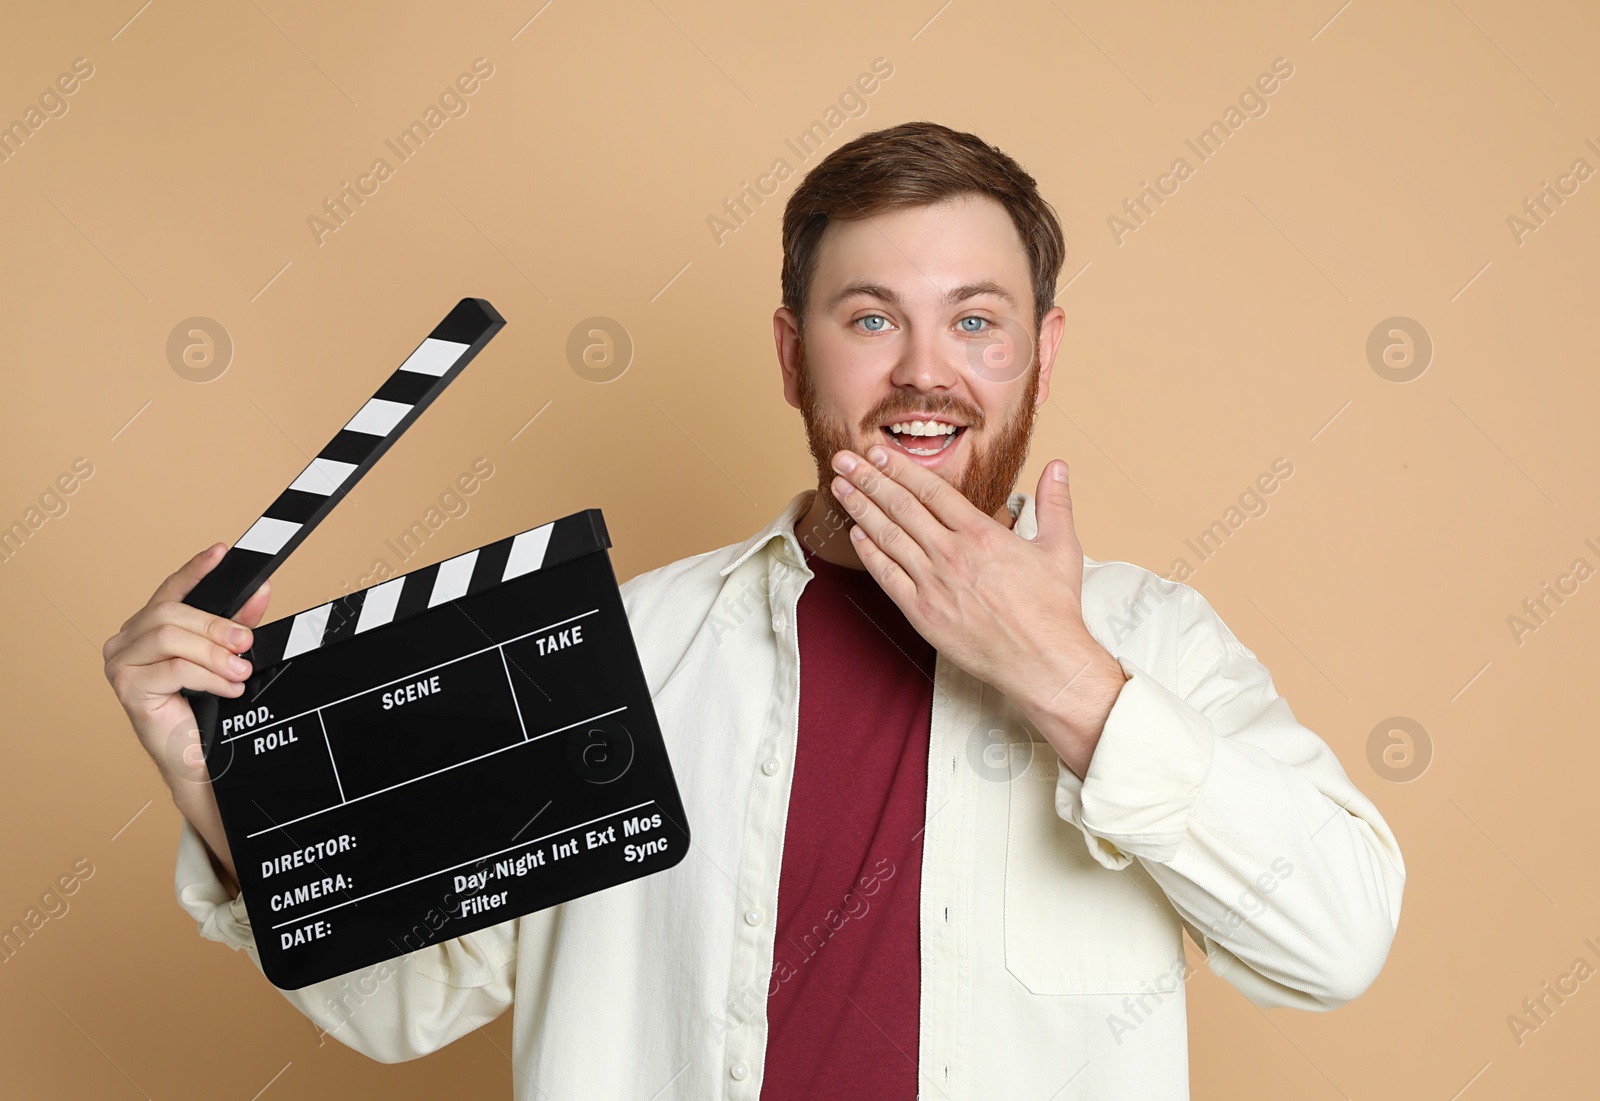 Photo of Making movie. Happy man with clapperboard on beige background